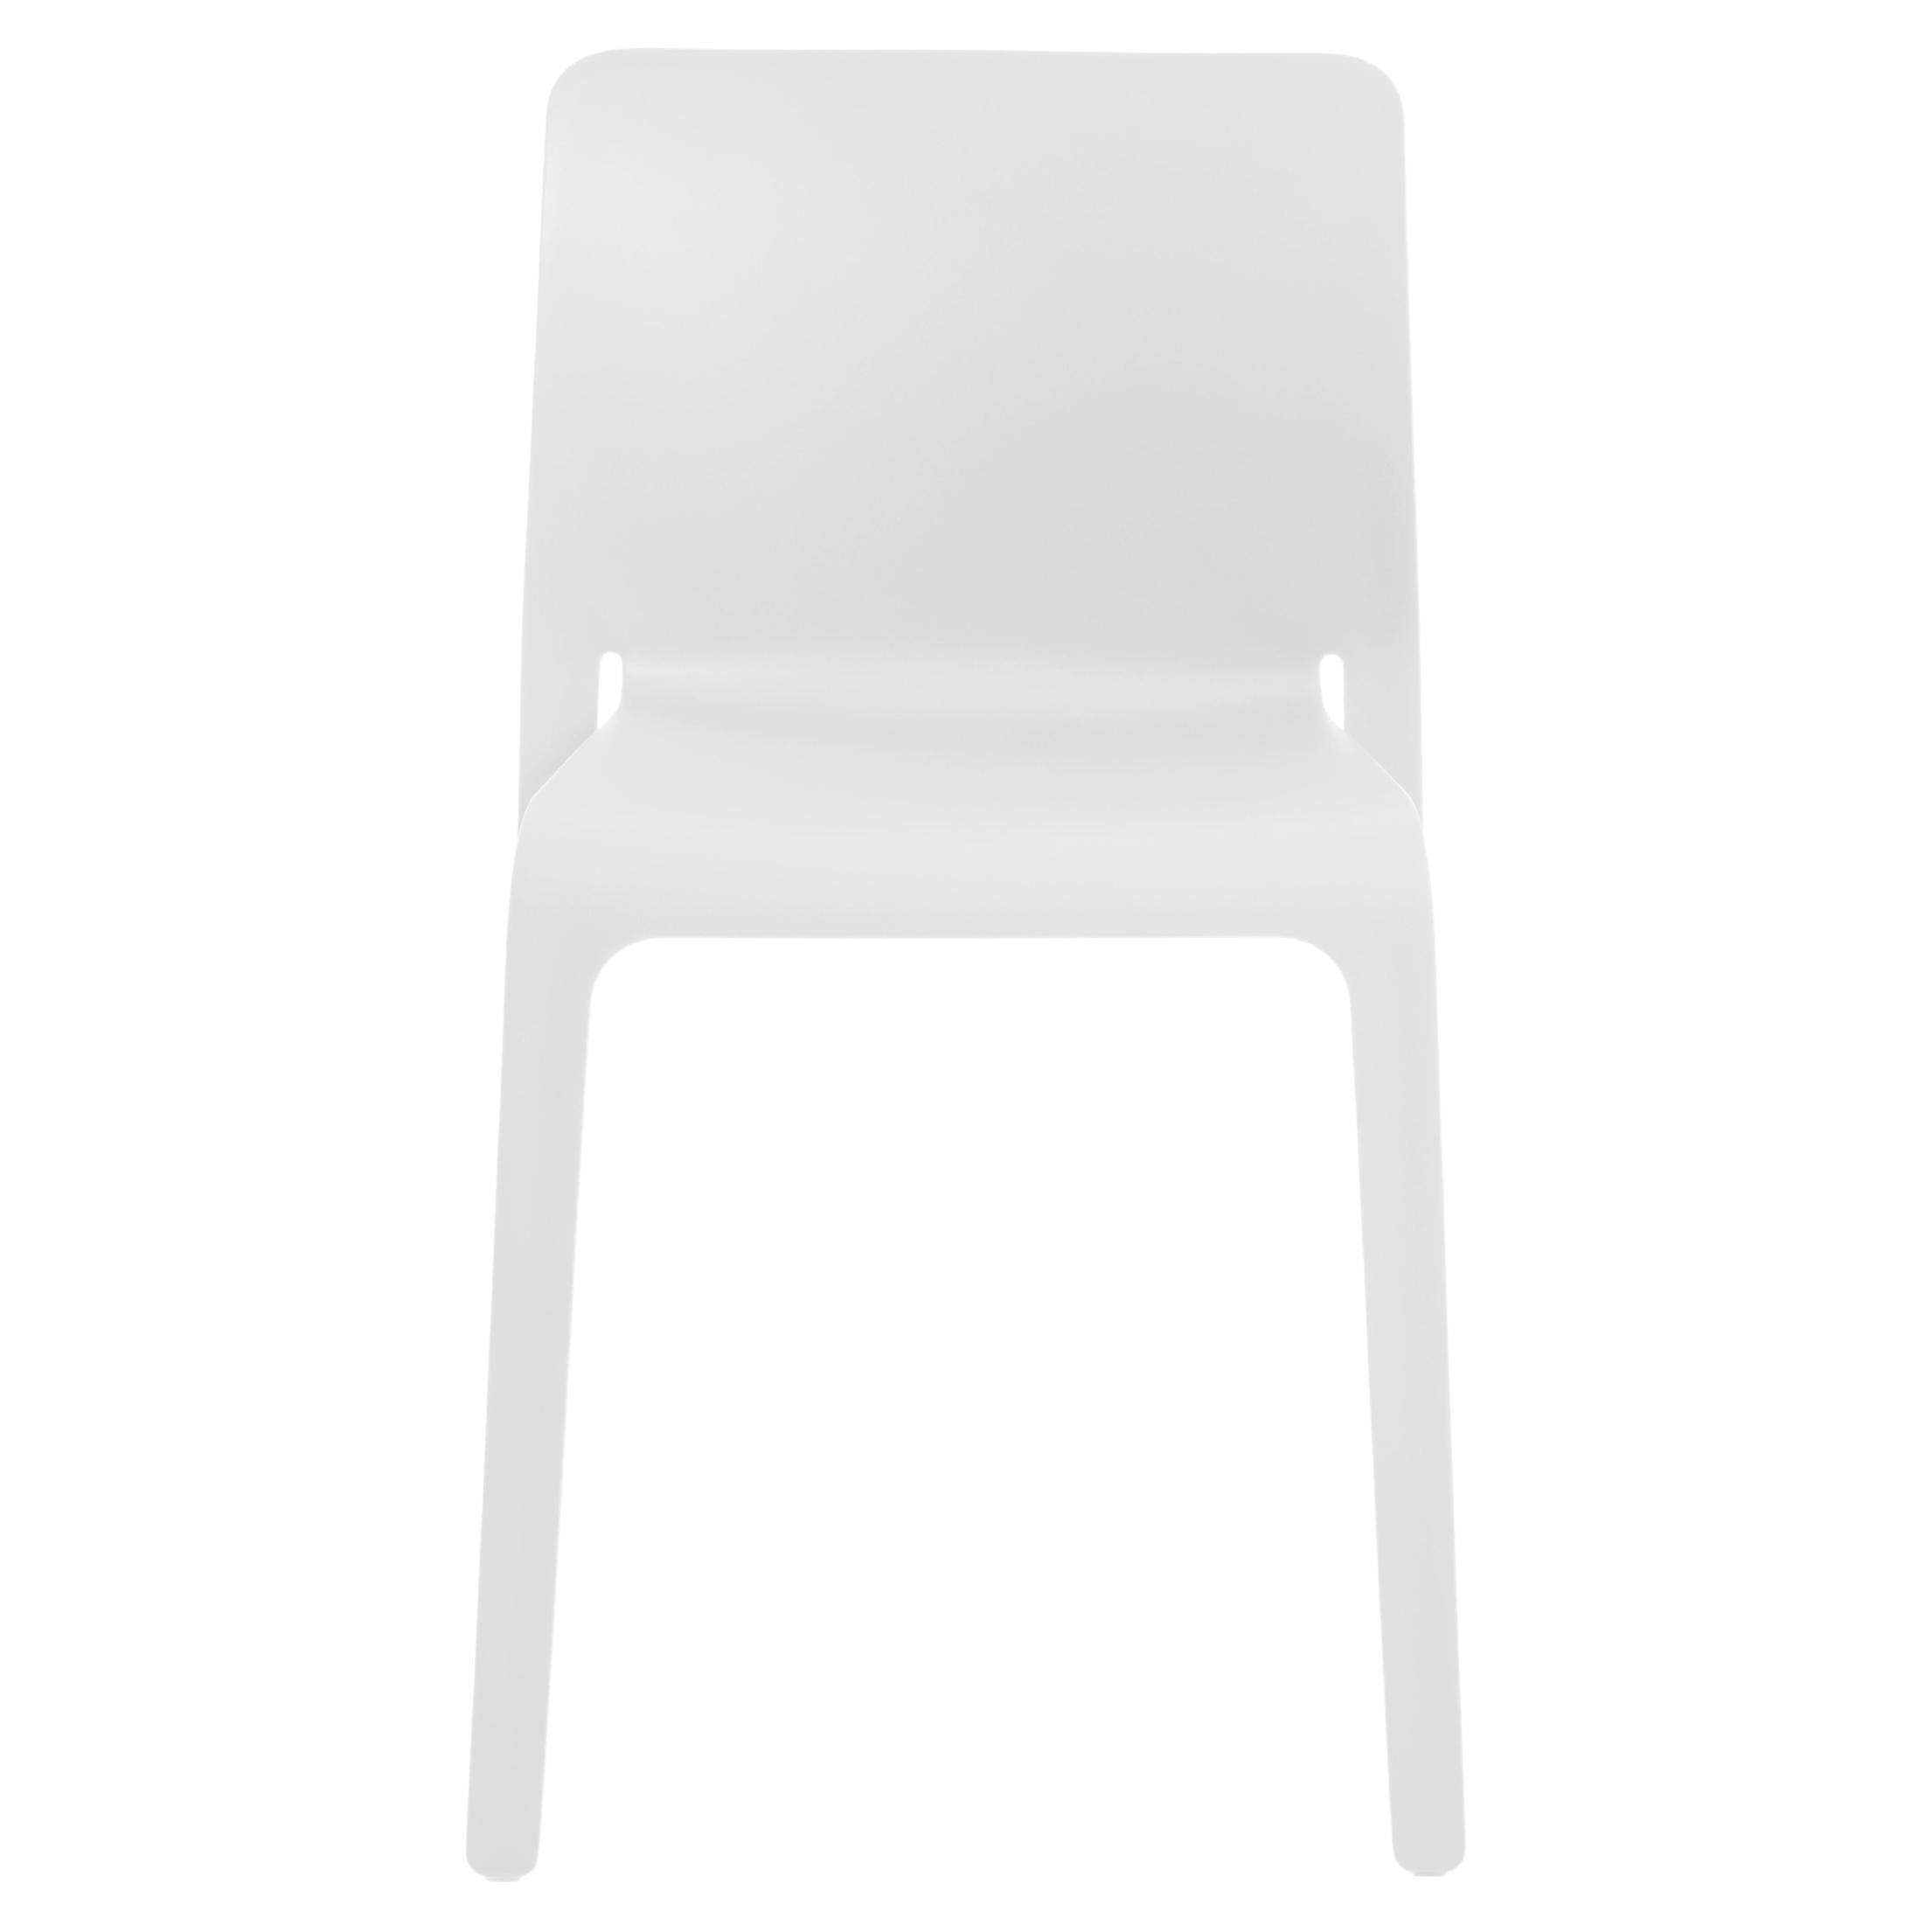 After Air-Chair, the first seat to use air-moulding technology, the chair First breaks new ground in this technology once again (hence its name).
The empty frame is used not only for volumes with a small, tubular cross-section, but also for the